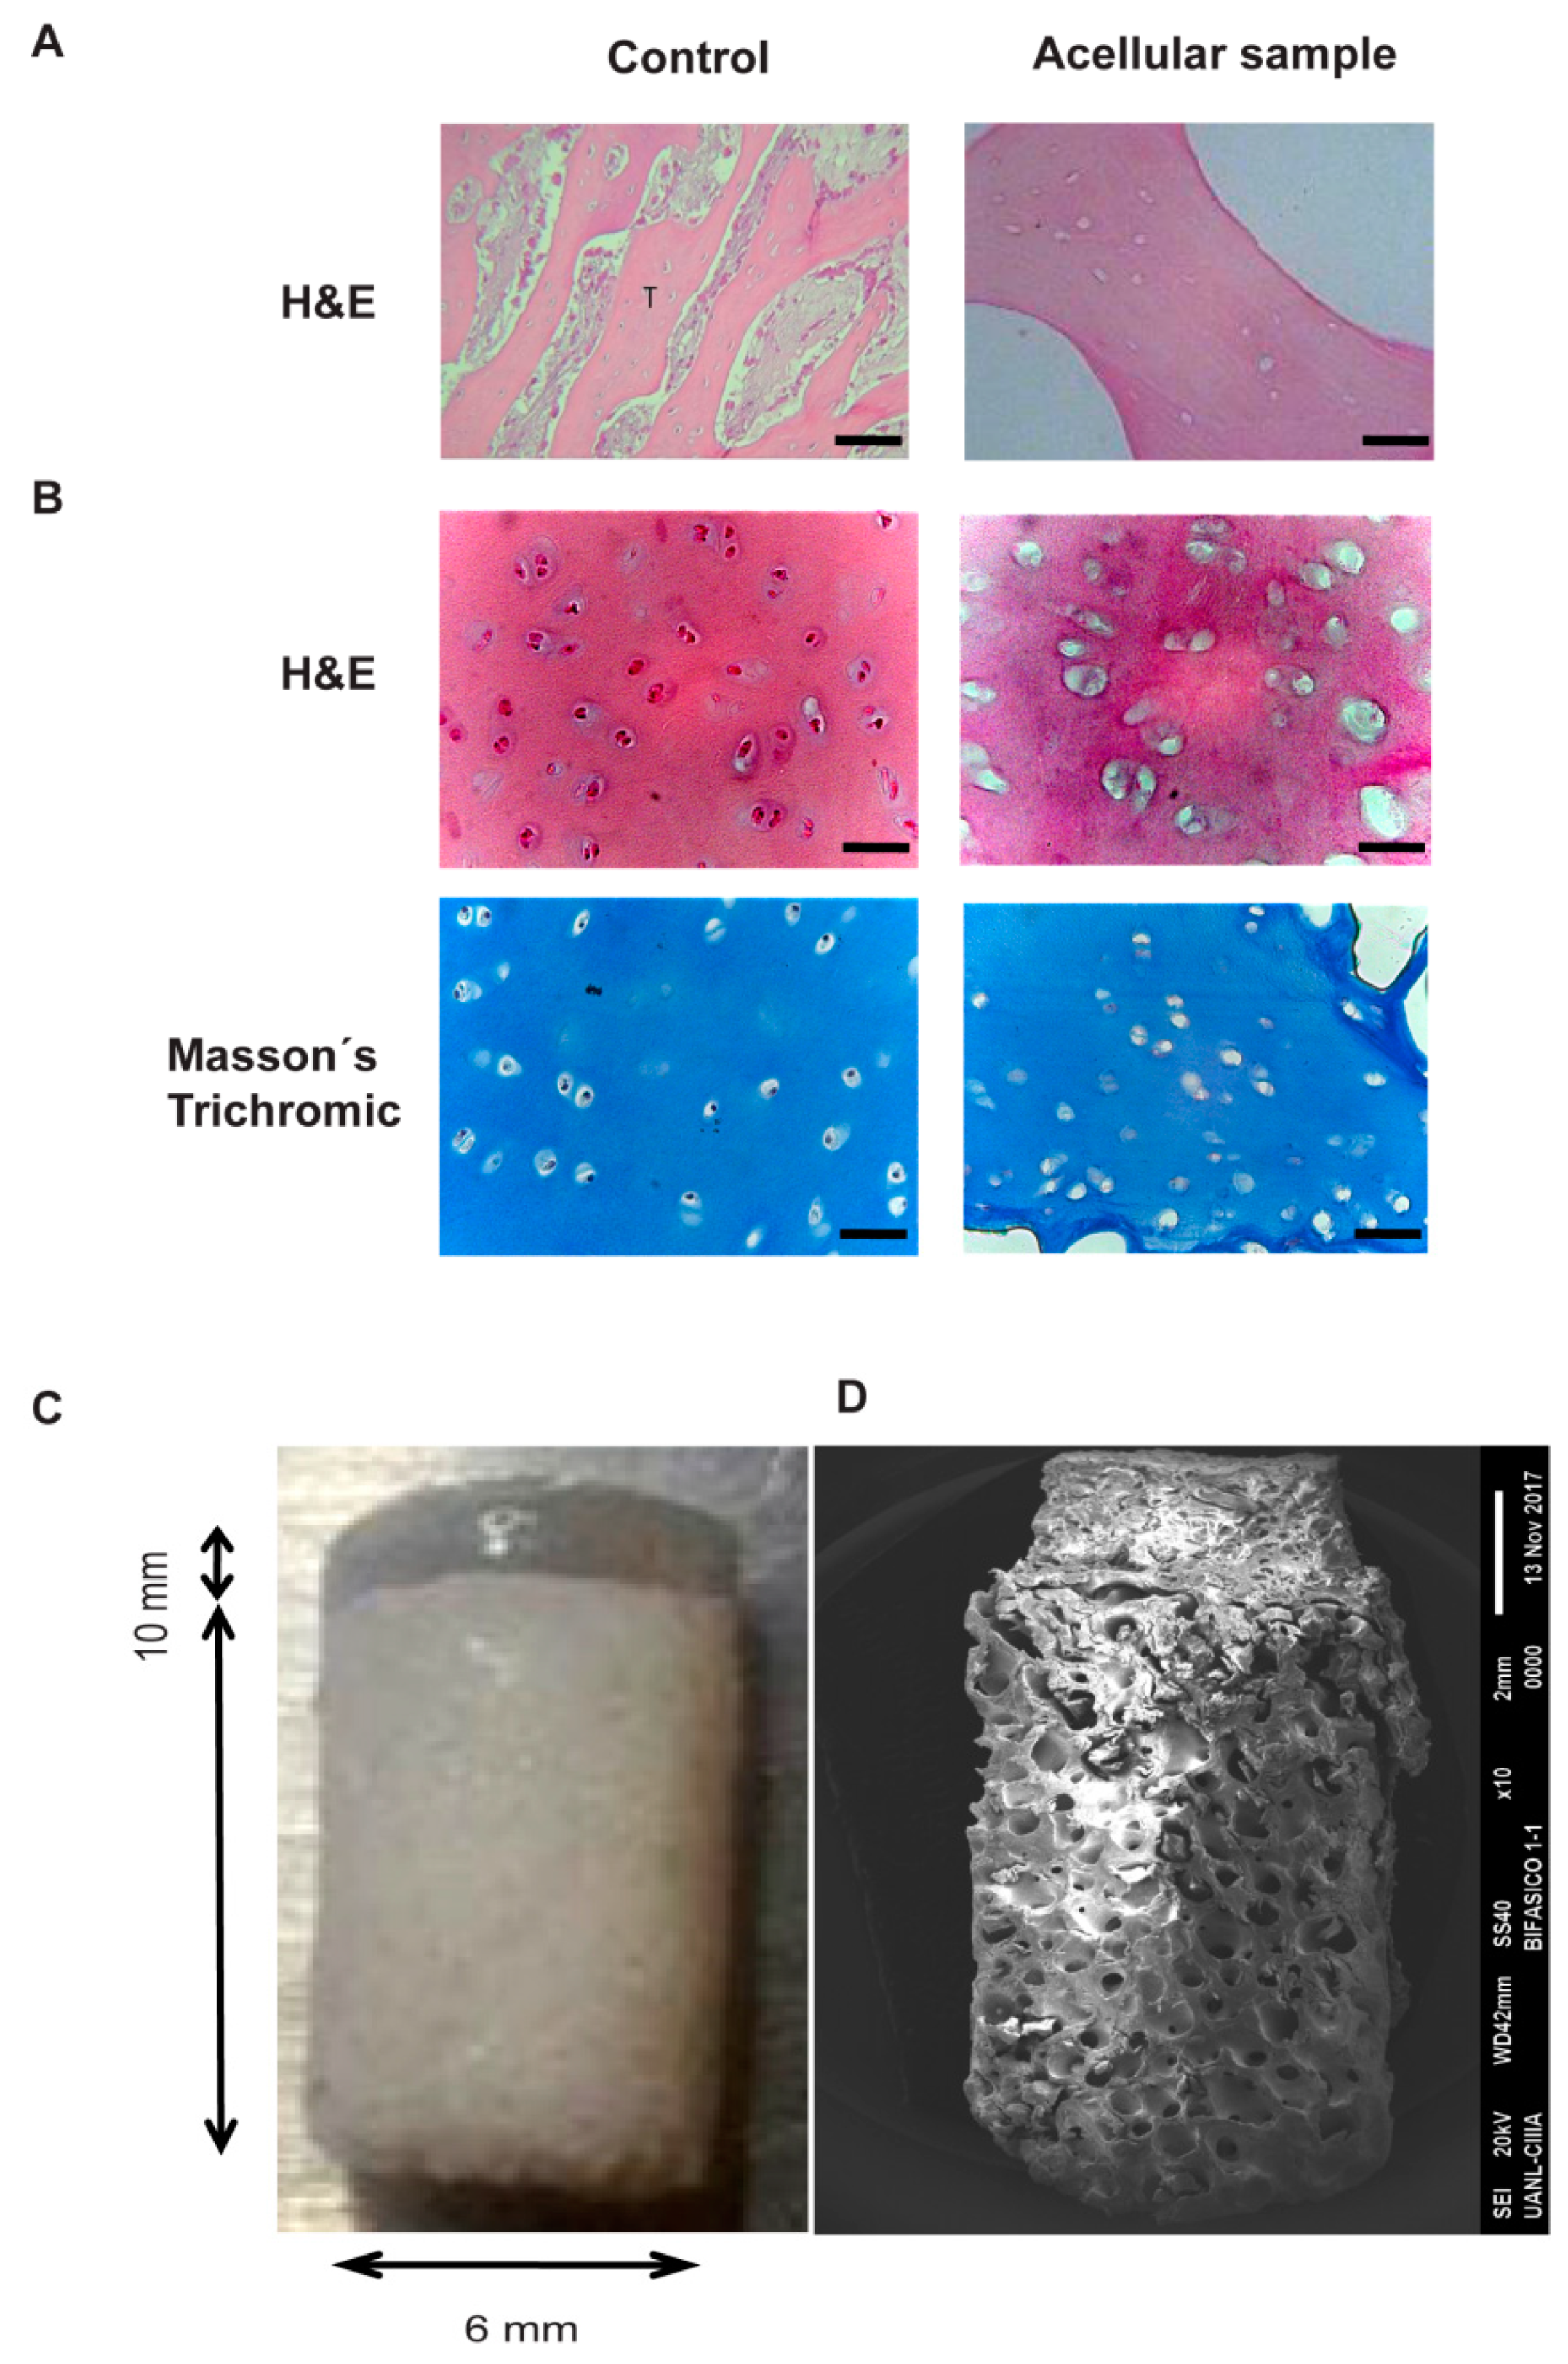 IJMS | Free Full-Text | A Cellularized Biphasic Implant Based on a  Bioactive Silk Fibroin Promotes Integration and Tissue Organization during  Osteochondral Defect Repair in a Porcine Model | HTML